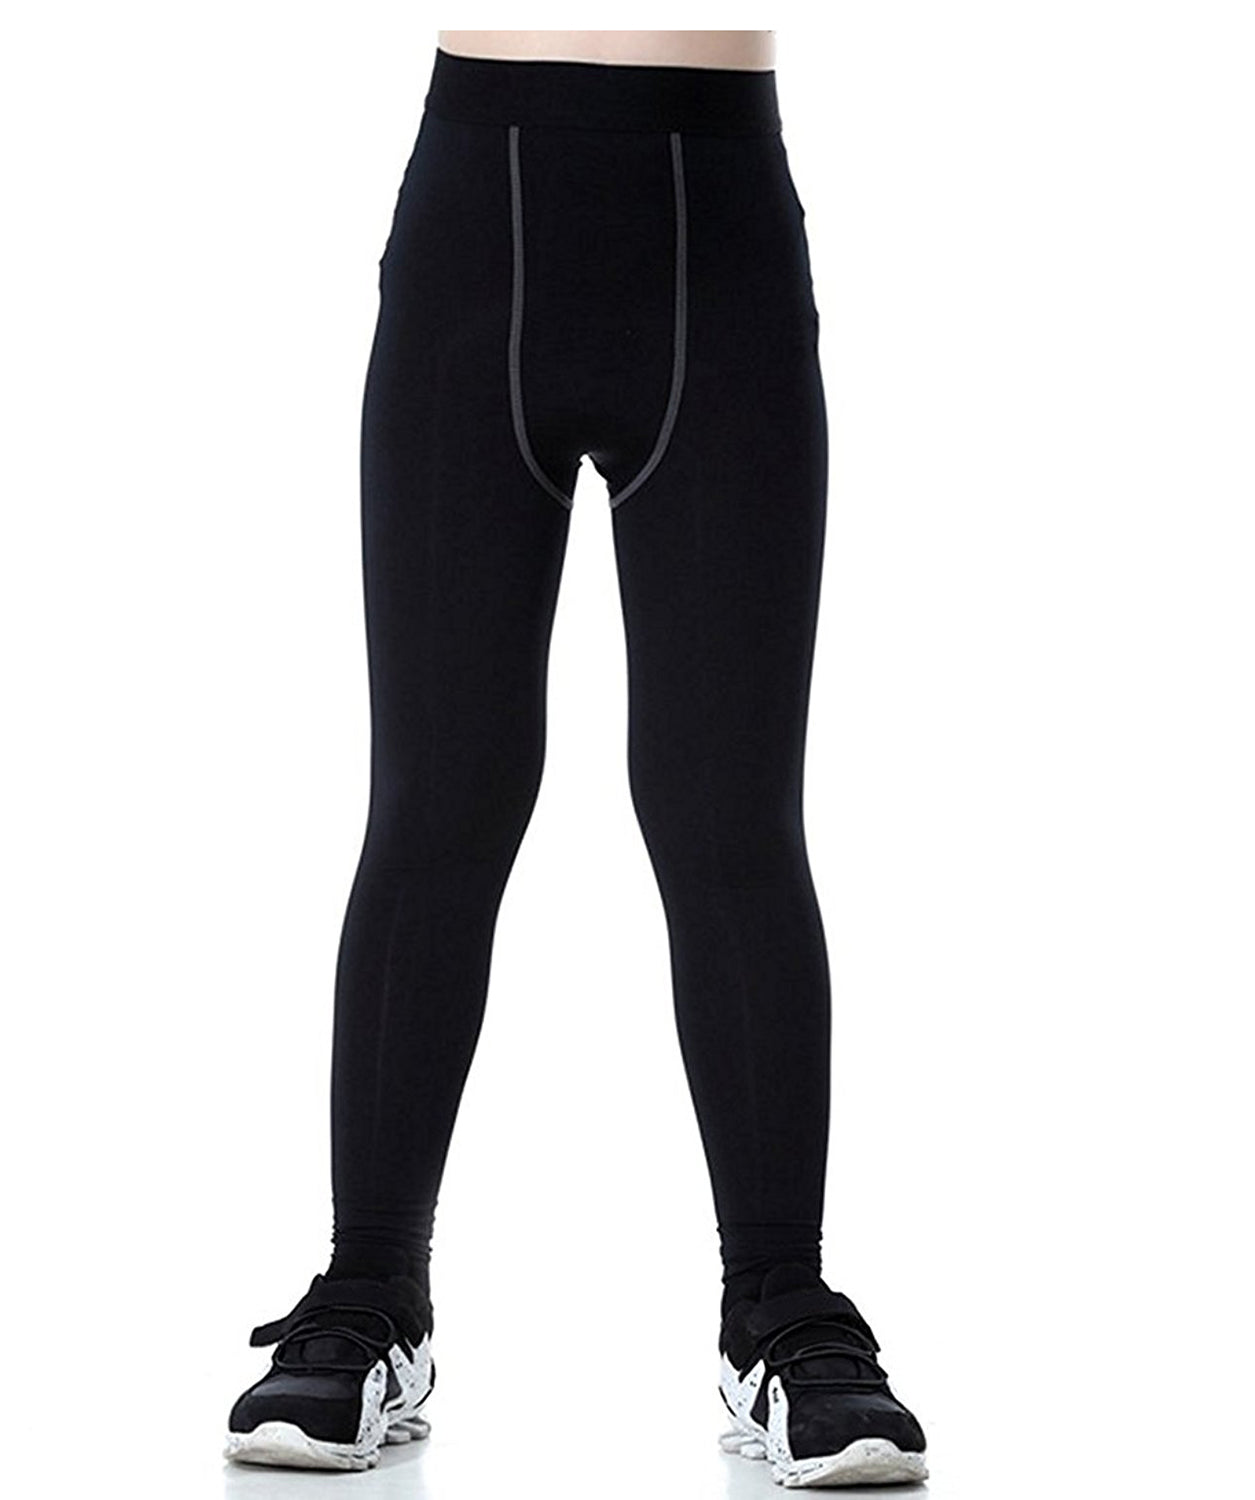  Youth Boys Compression Leggings Sports Tights